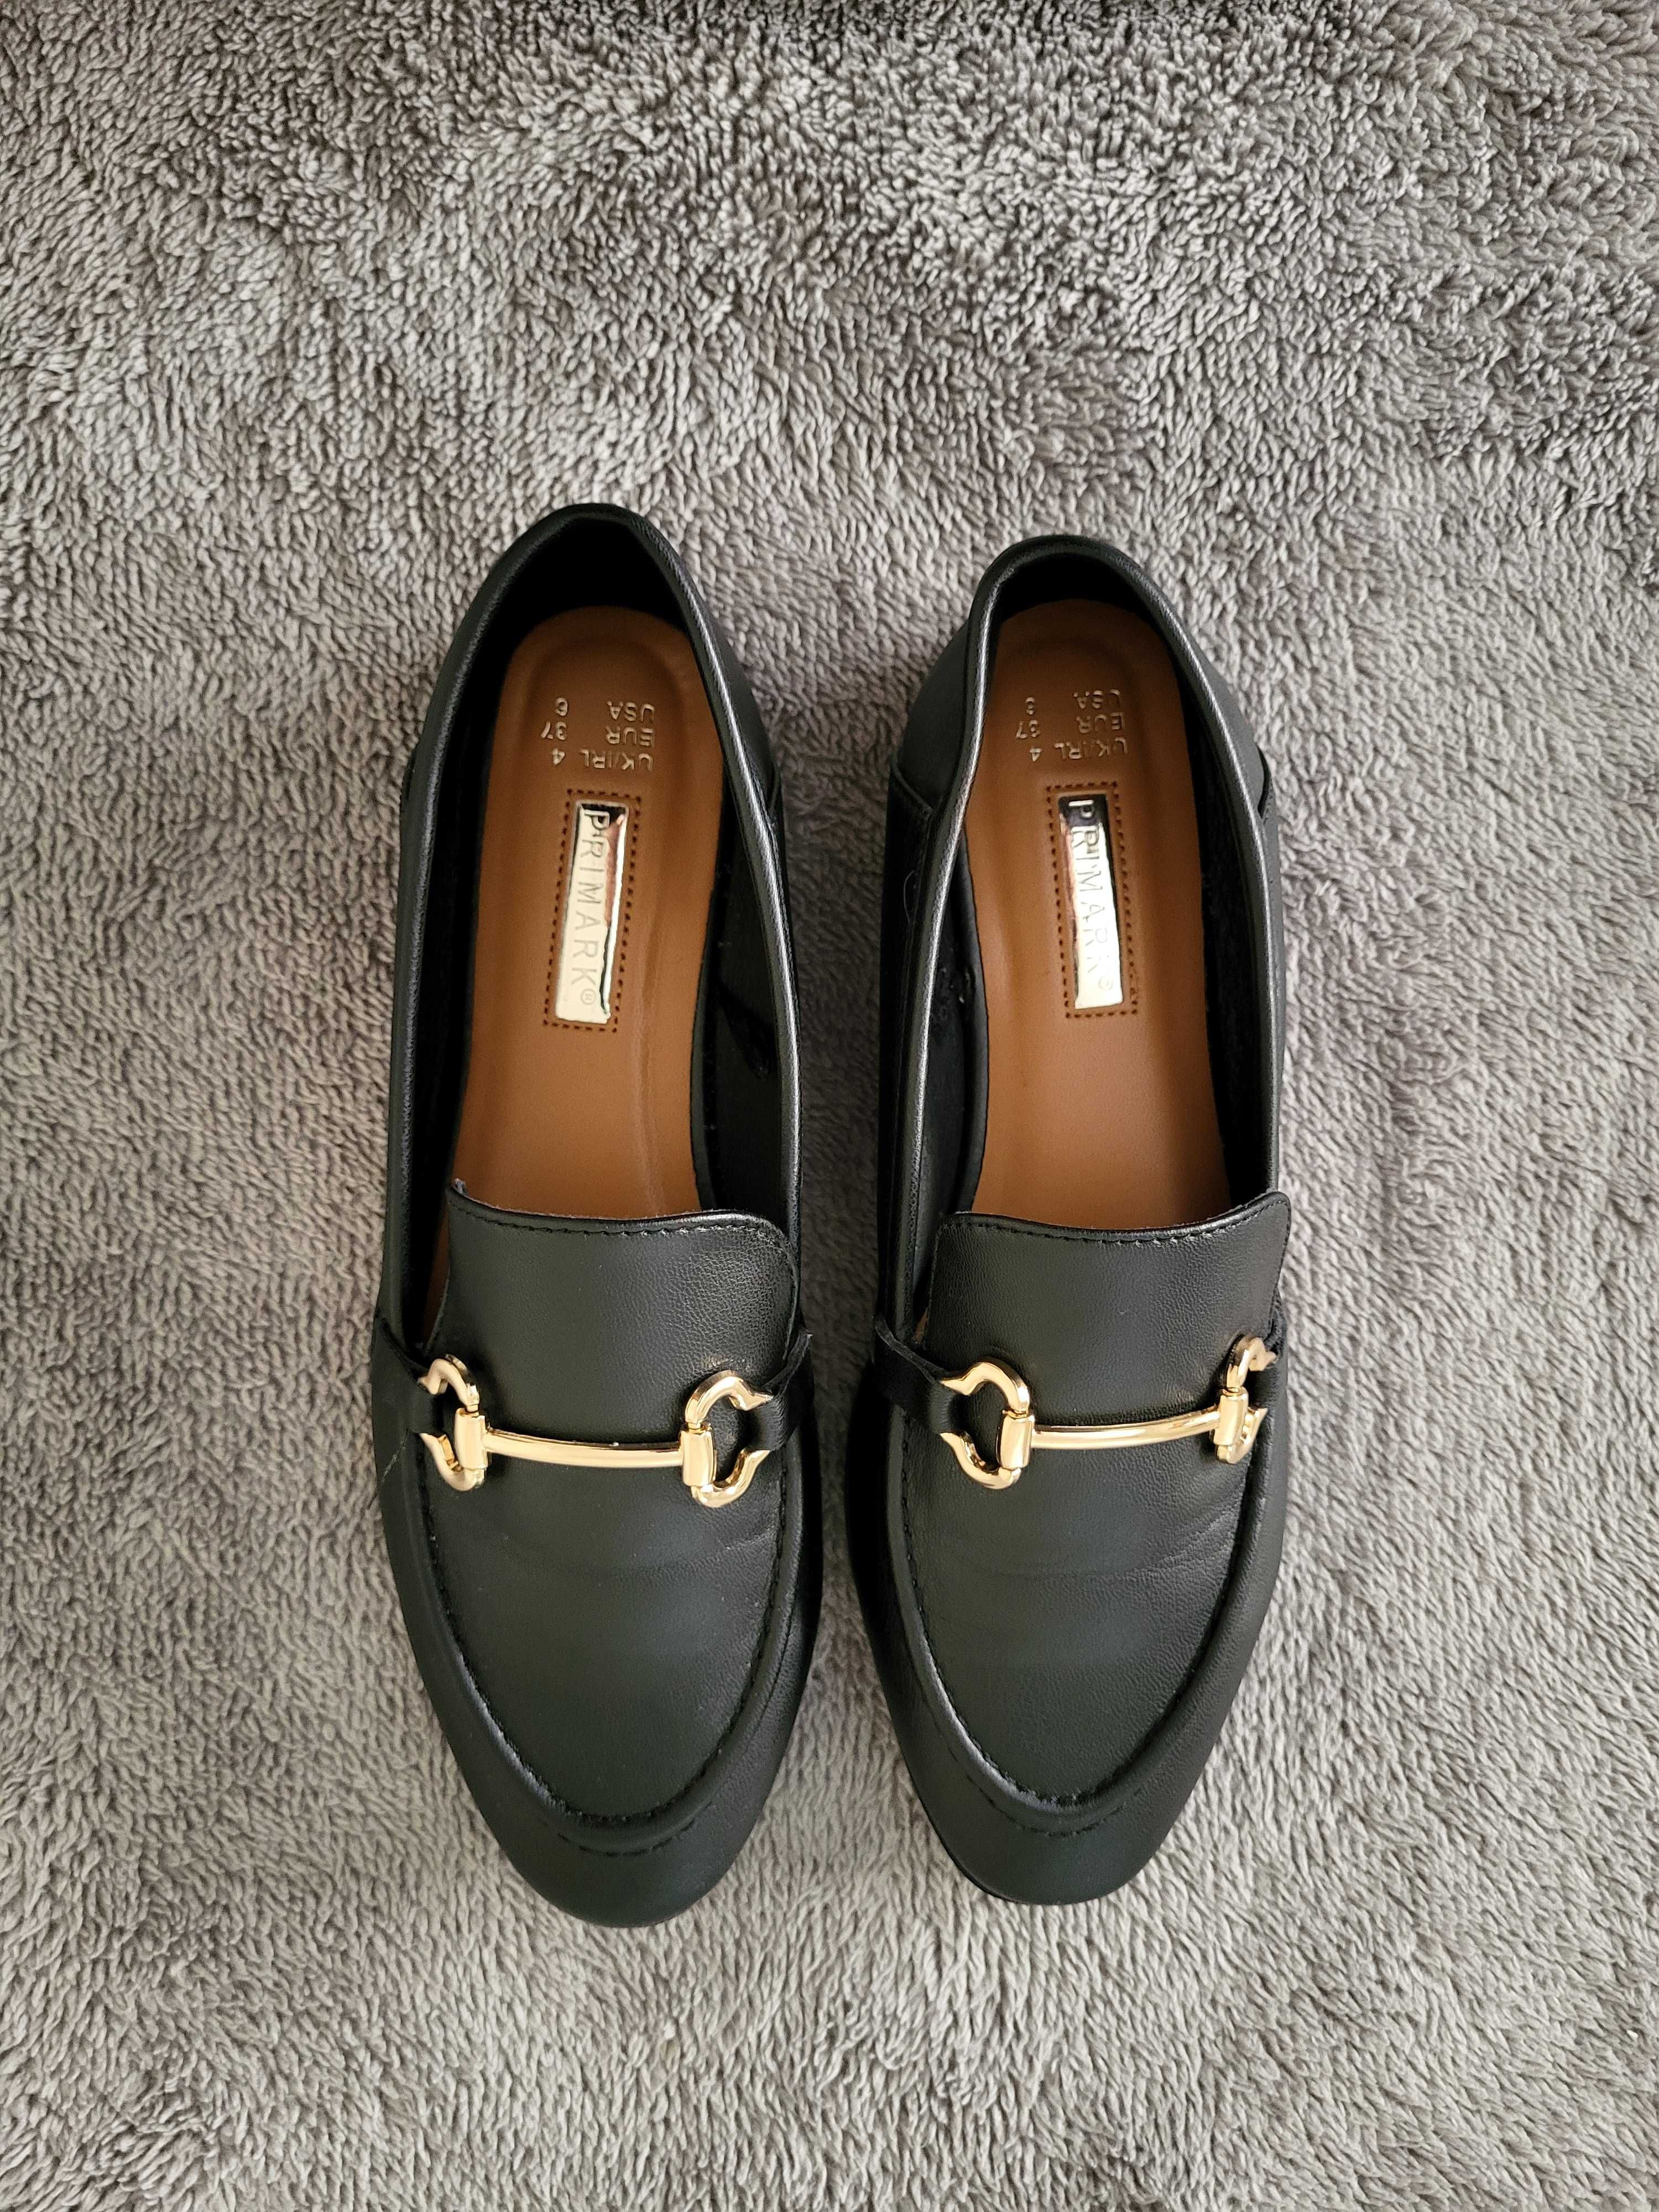 Black shoes for women